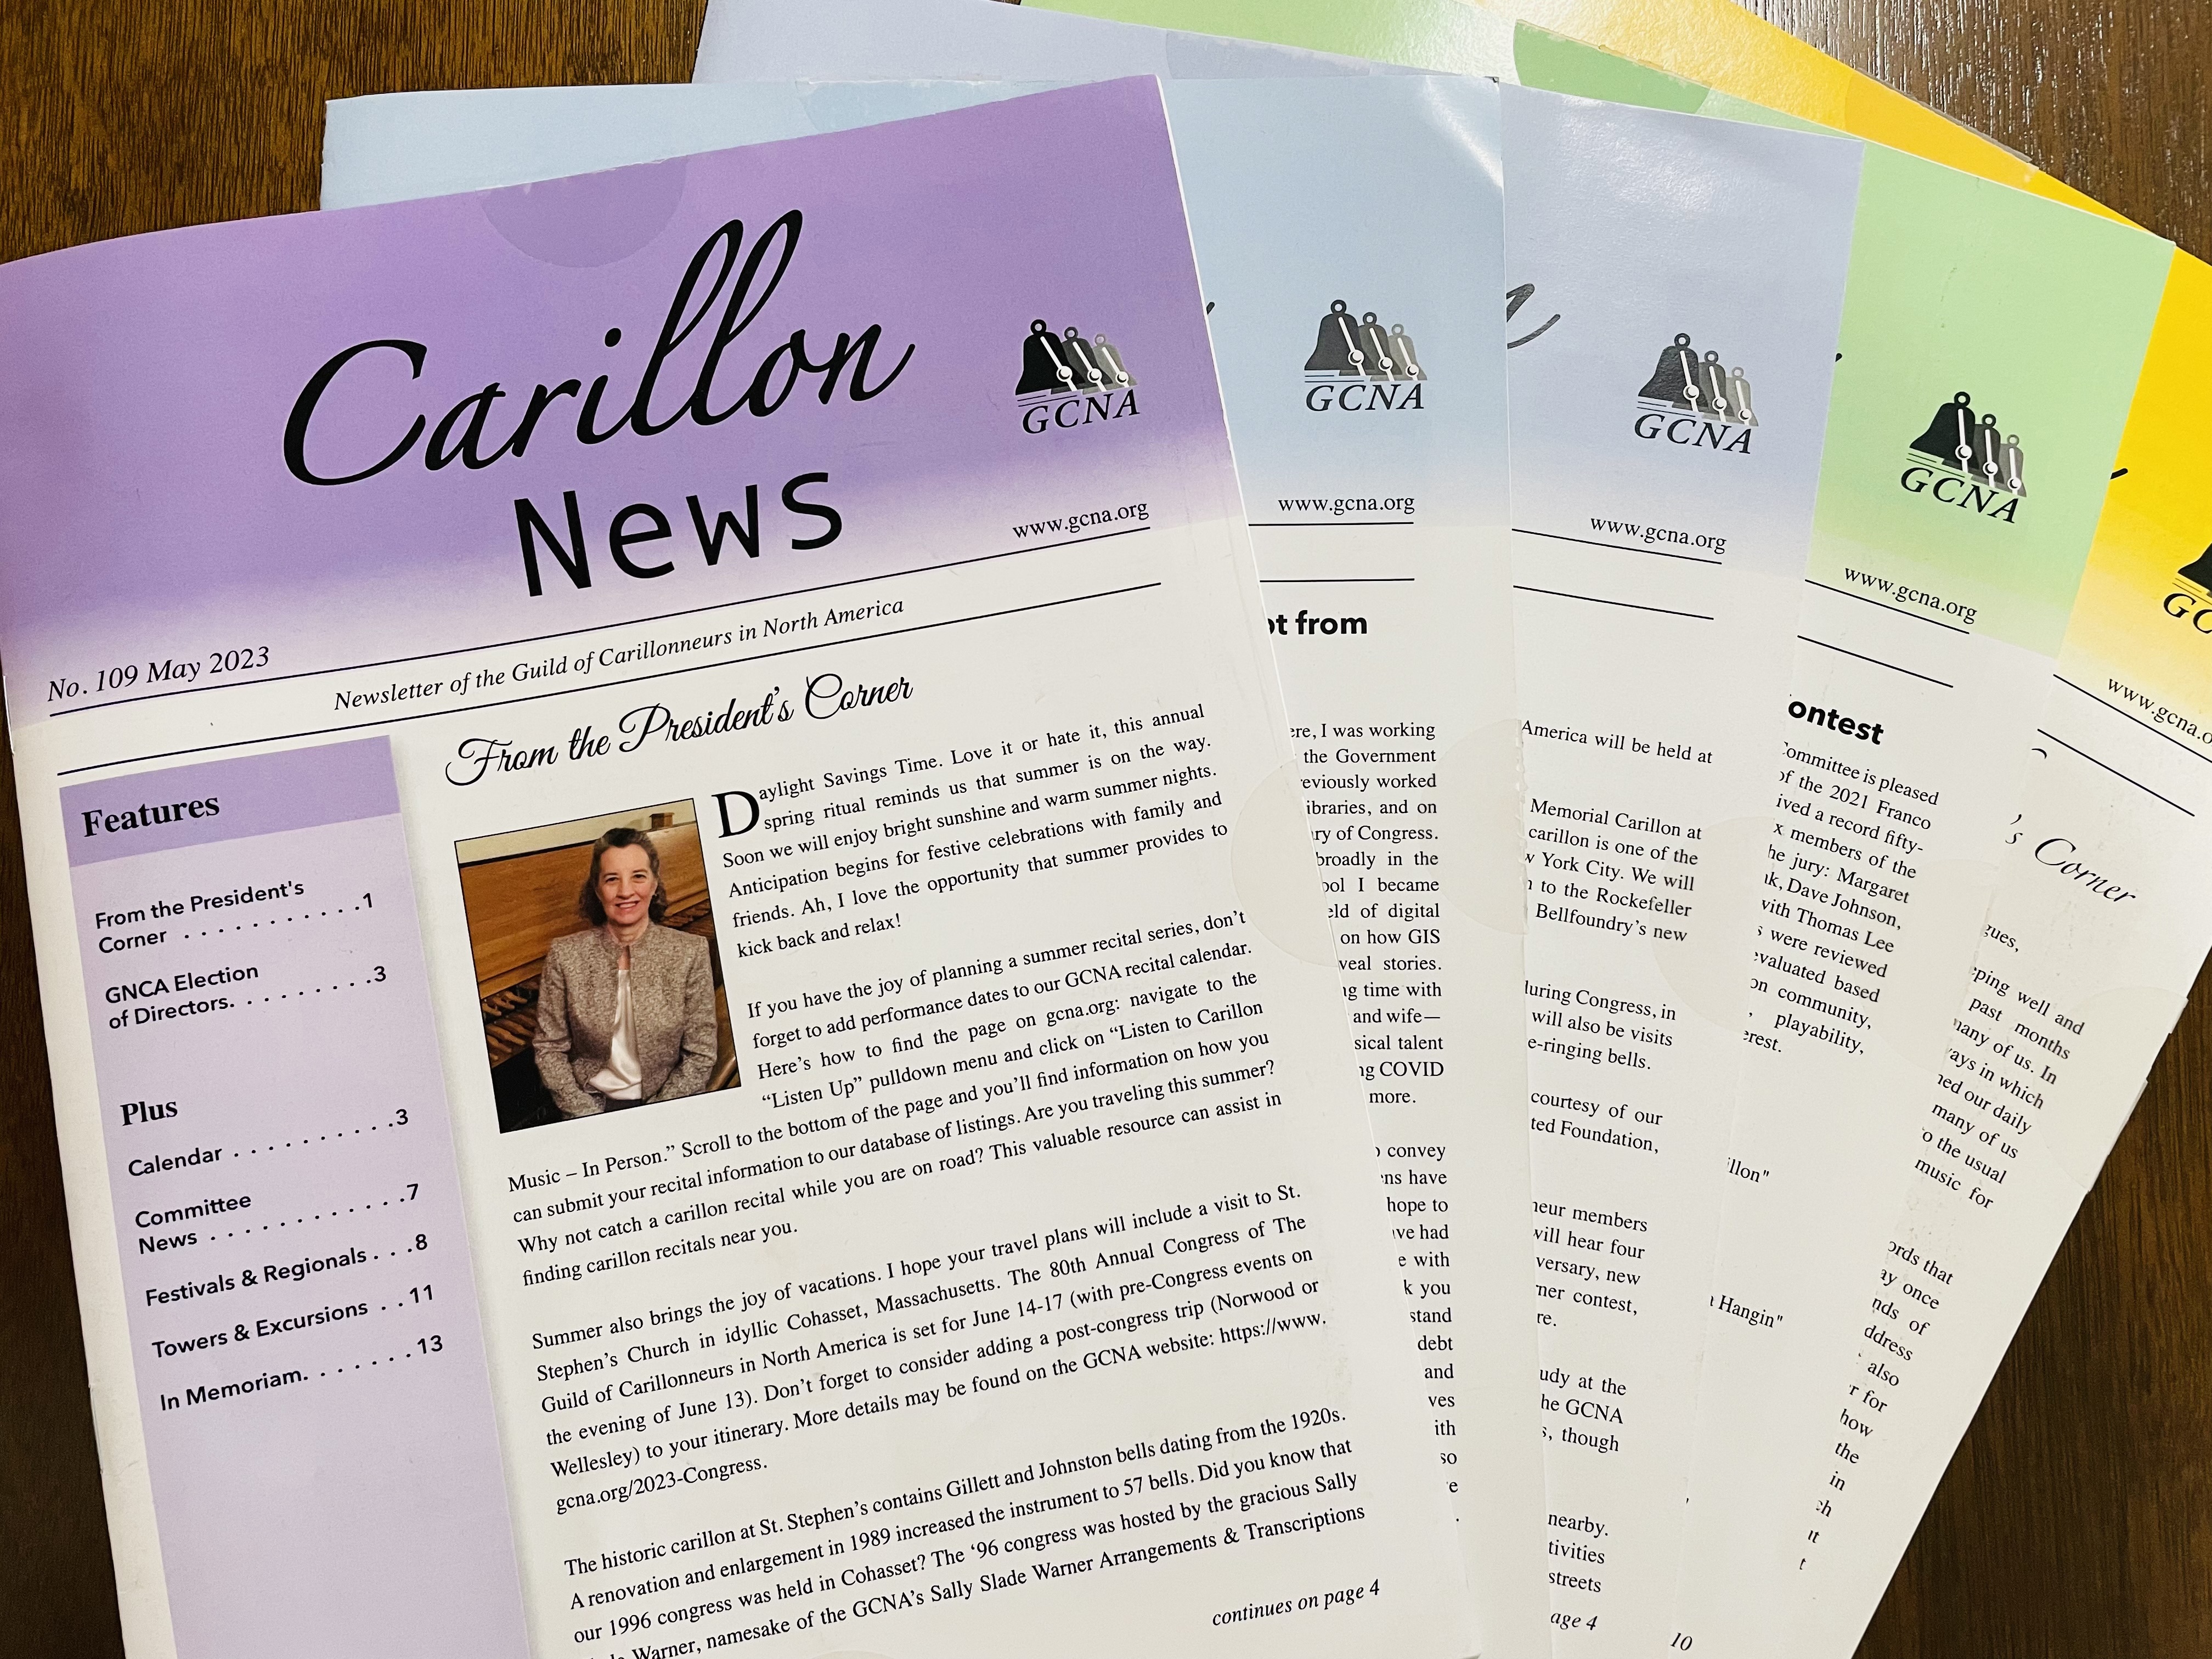 Printed Carillon News issues